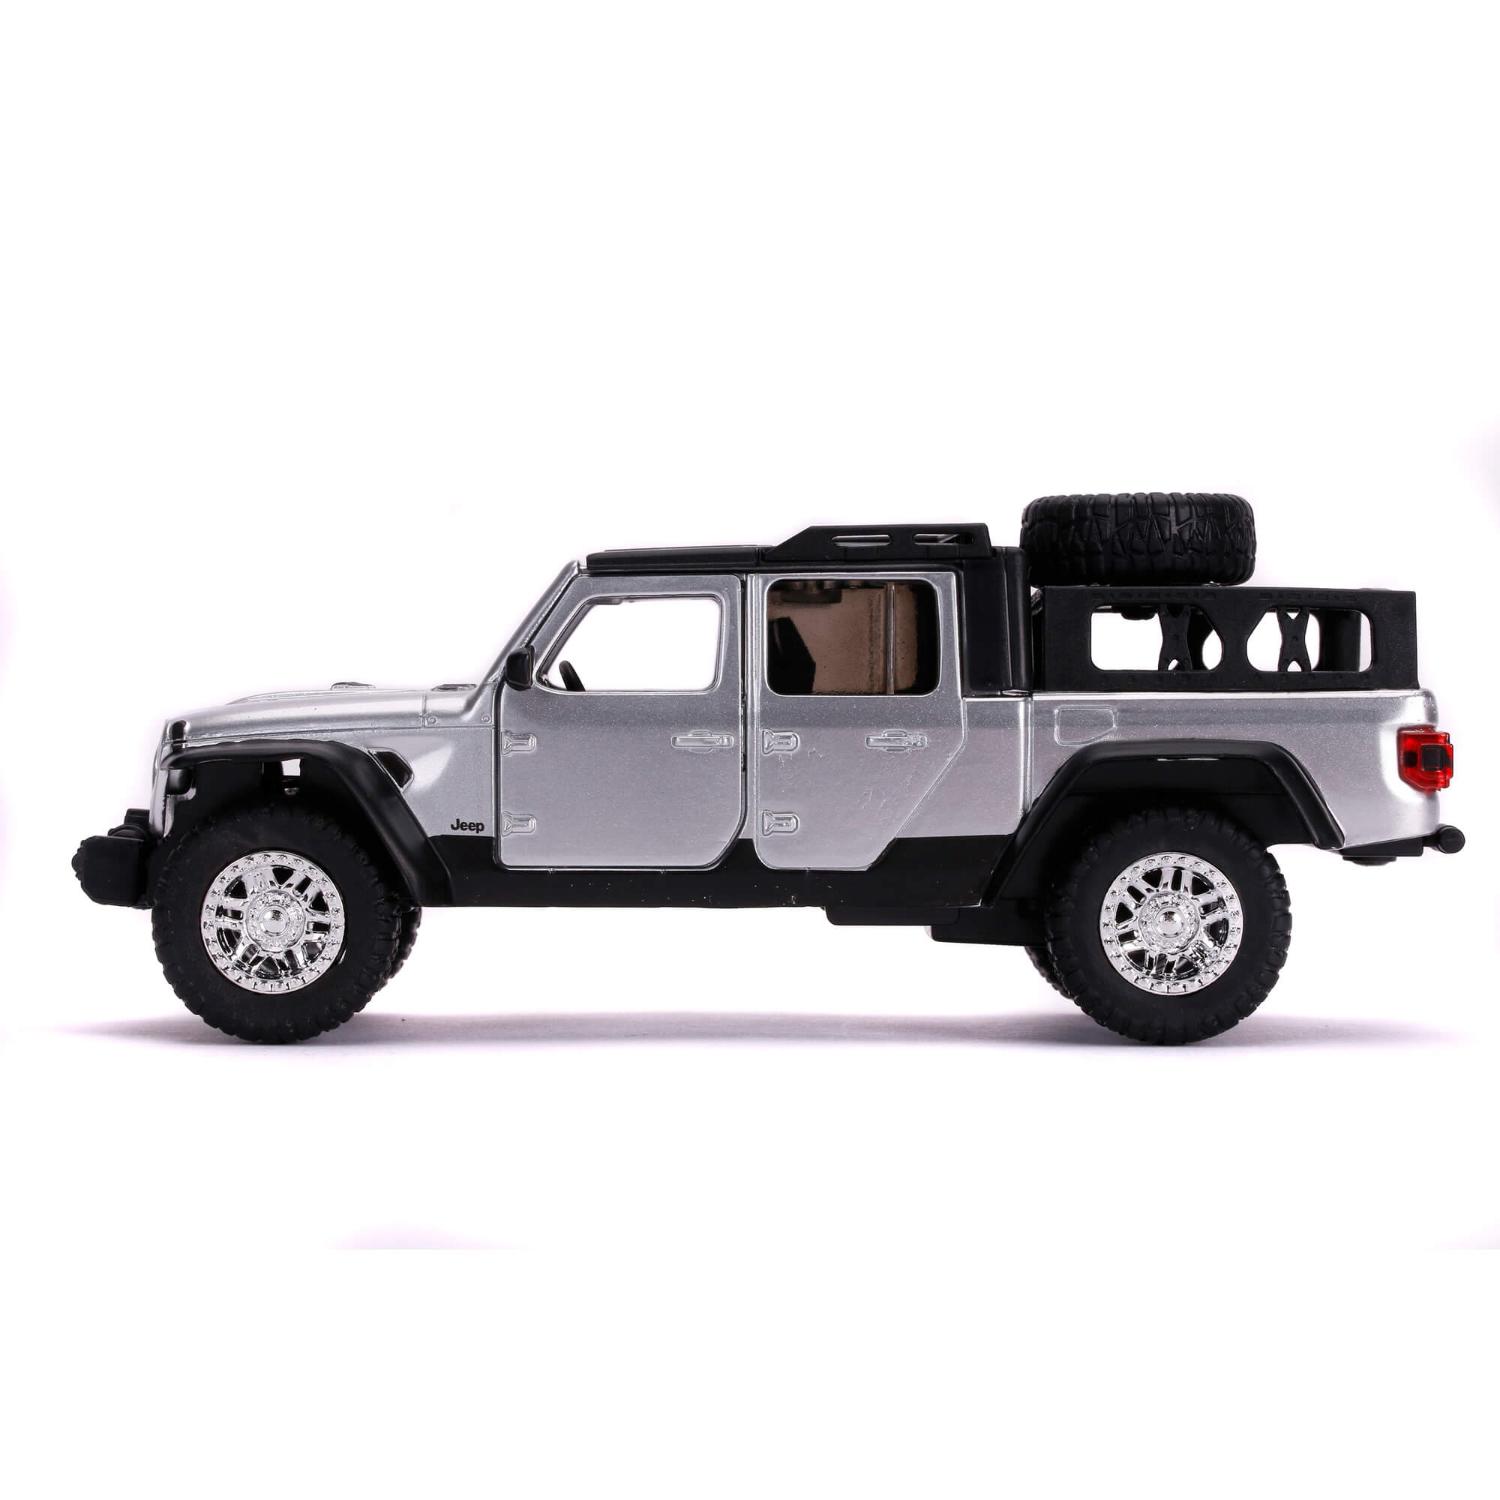 The model shown here as driven by Tej Parker is the Jeep Gladiator decorated in silver with chrome wheels